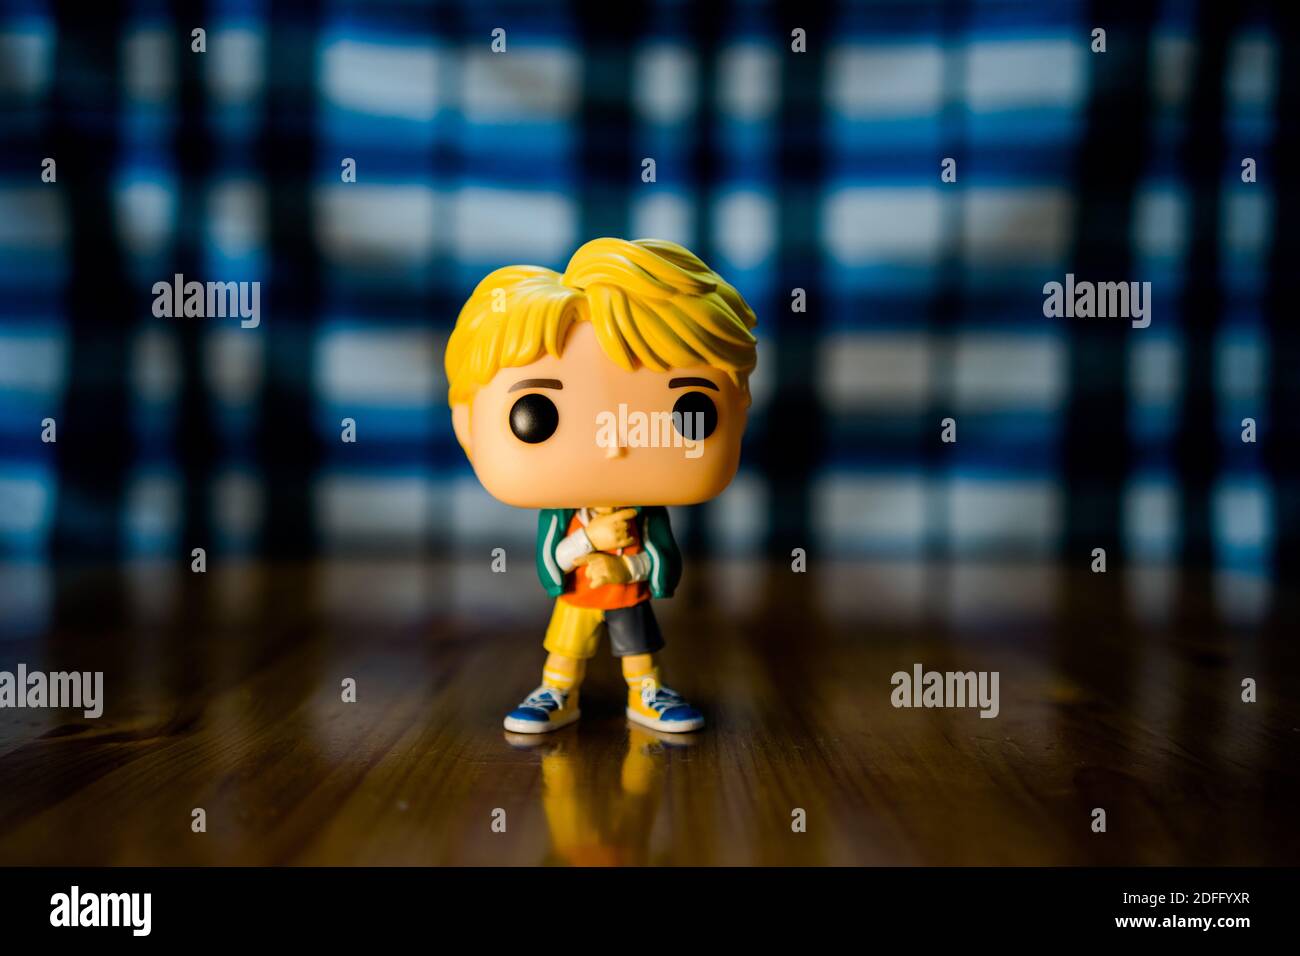 Gangnam, South Korea - March 01, 2020. BTS character figurine at the House of BTS Pop Up Store Stock Photo